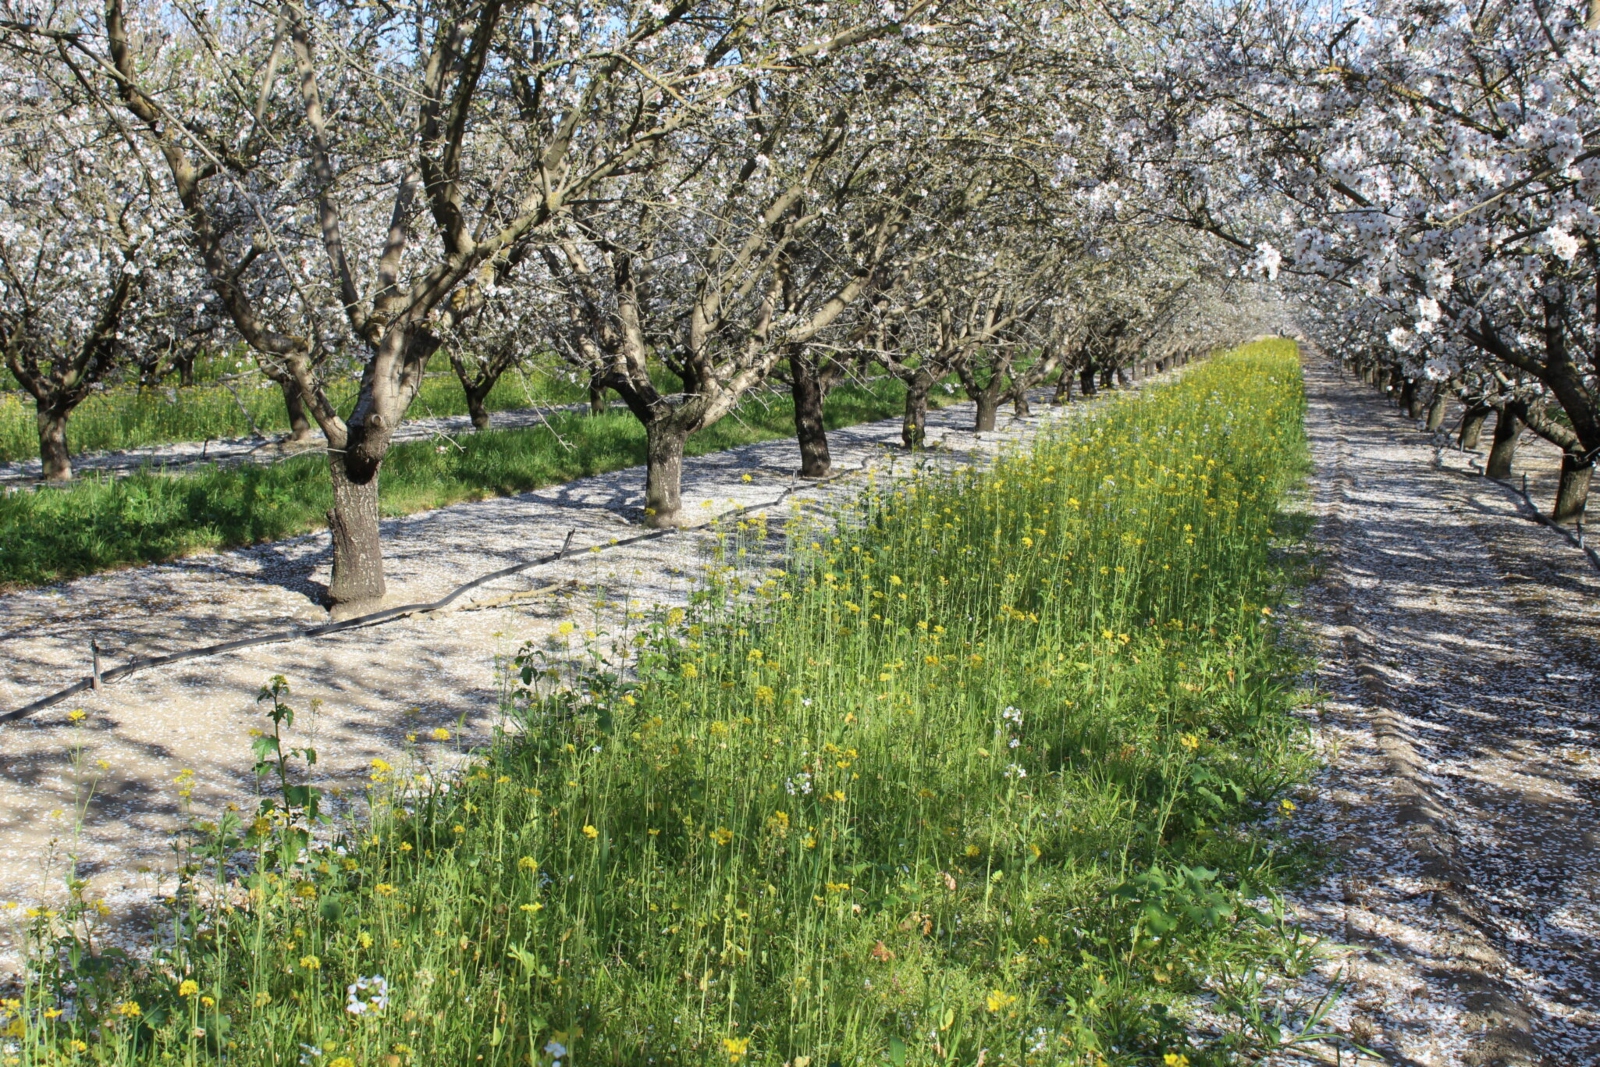 A row of green plants intersects a row of blooming trees with white flowers.